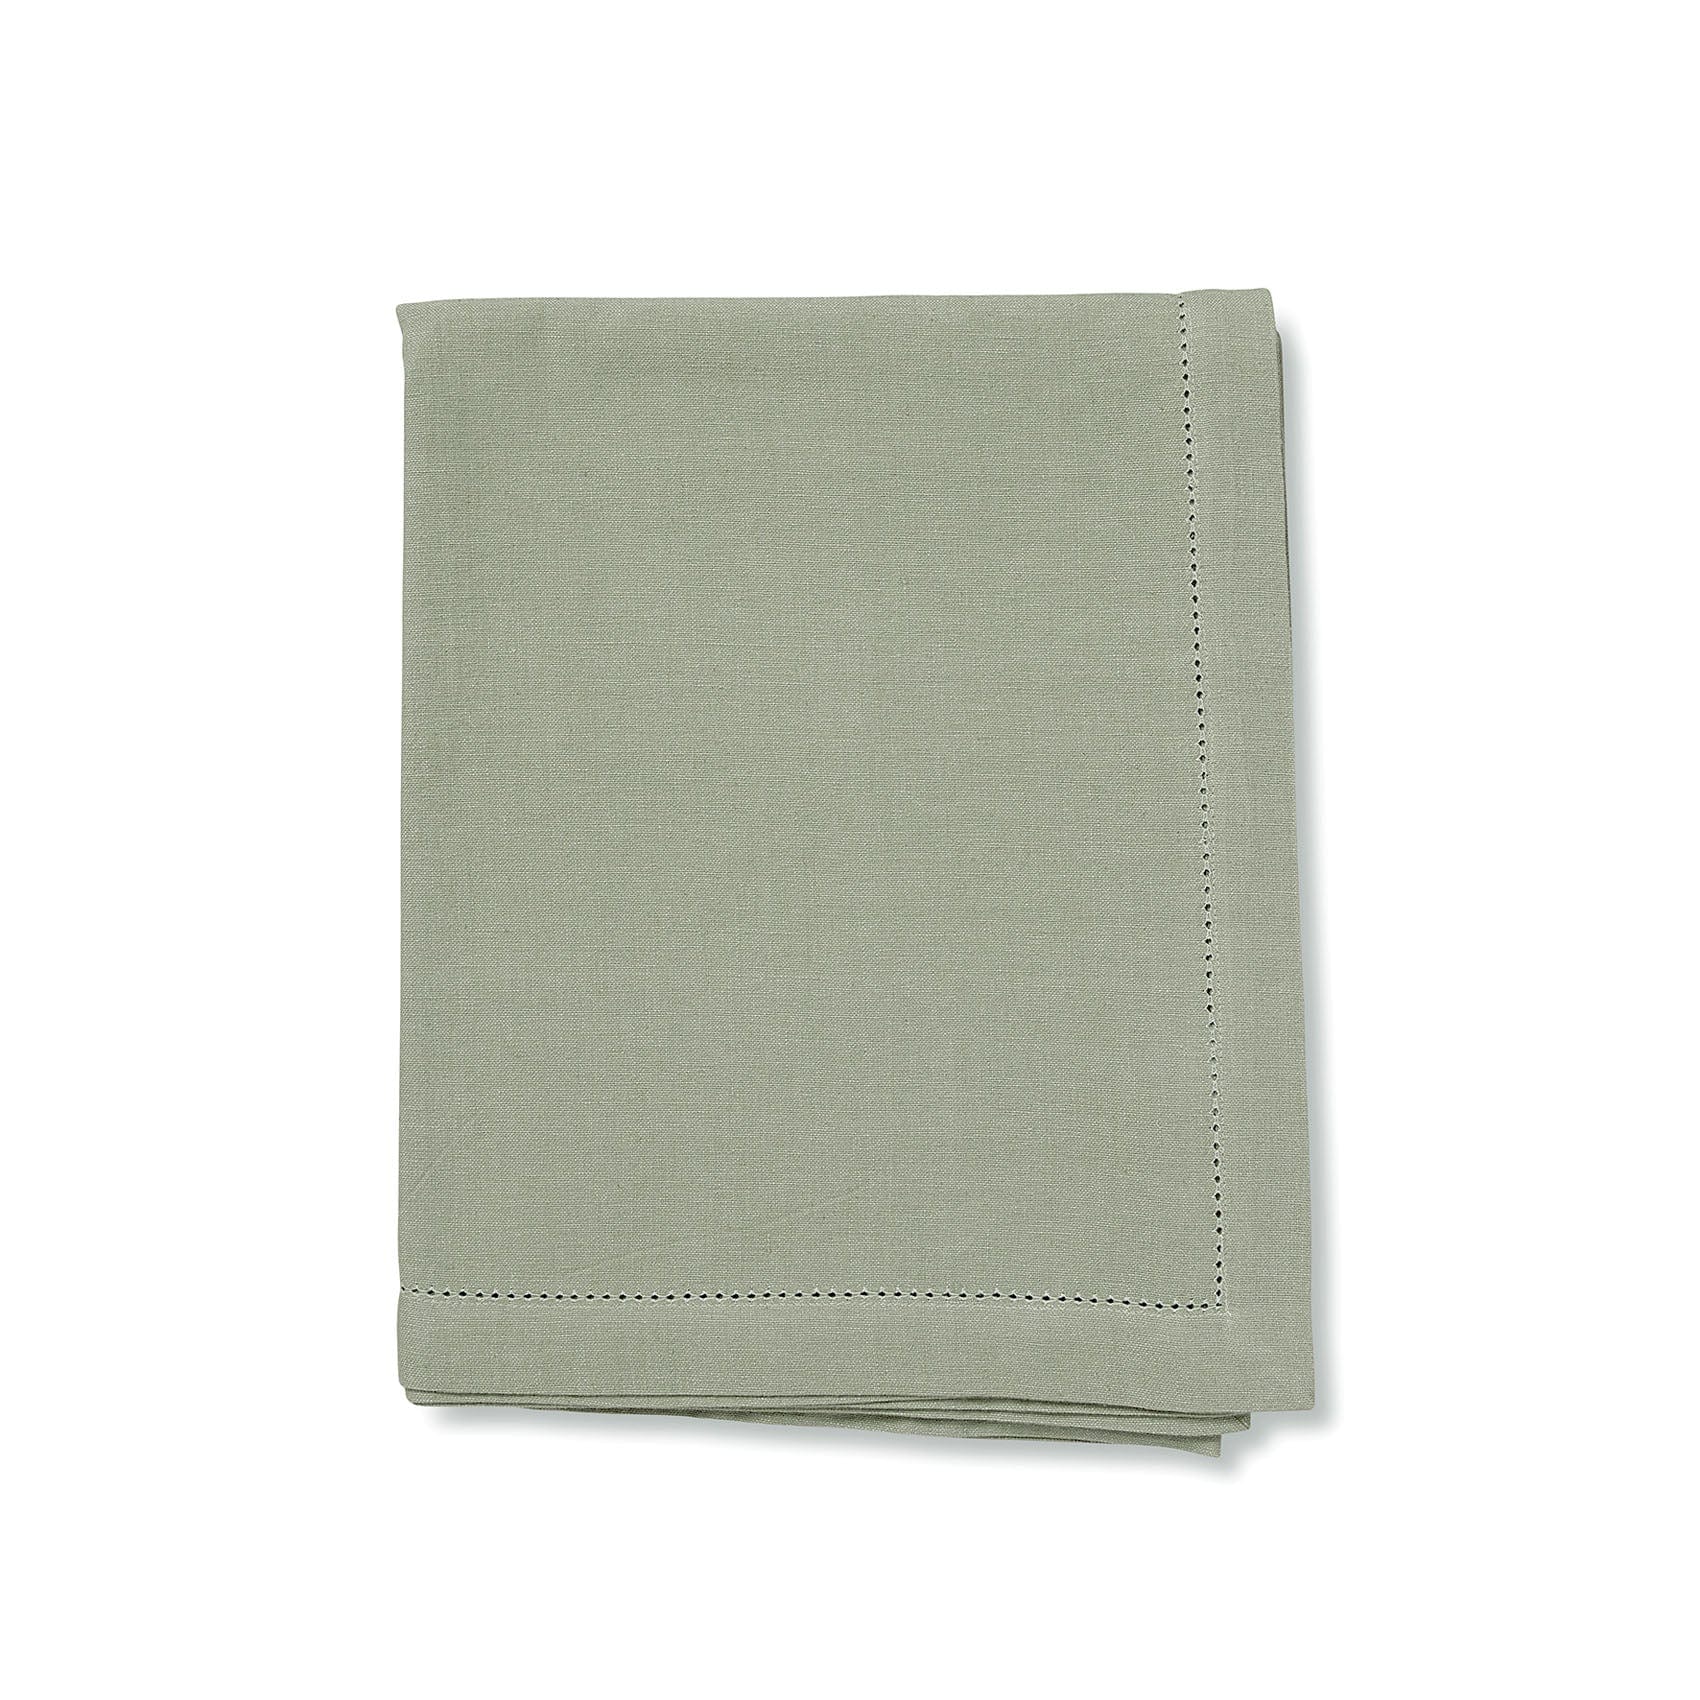 Gaudion Furniture 230 Tablecloth Jetty Mineral Green Tablecloth 180x280